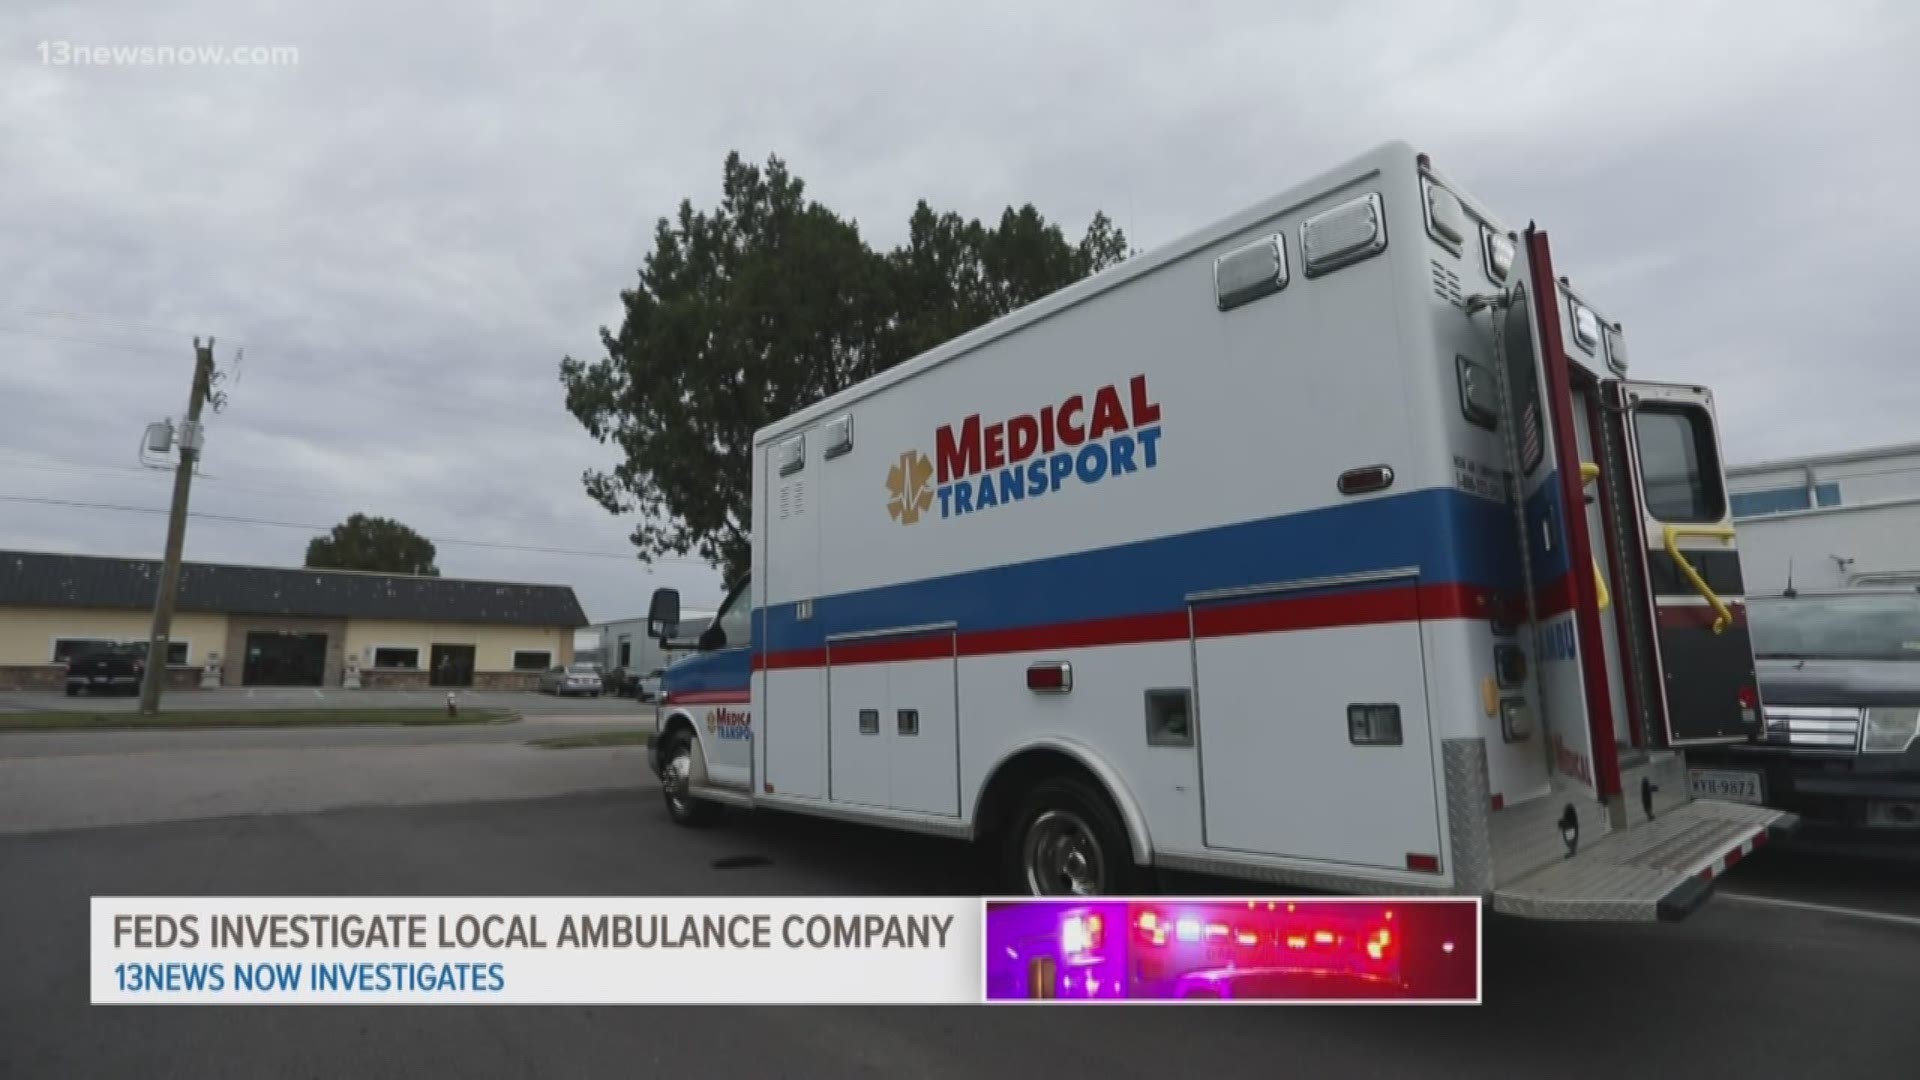 Medical Transport LLC, a subsidiary of Sentara Healthcare, admits it mistakenly billed federal healthcare programs for non-emergency ambulance rides.